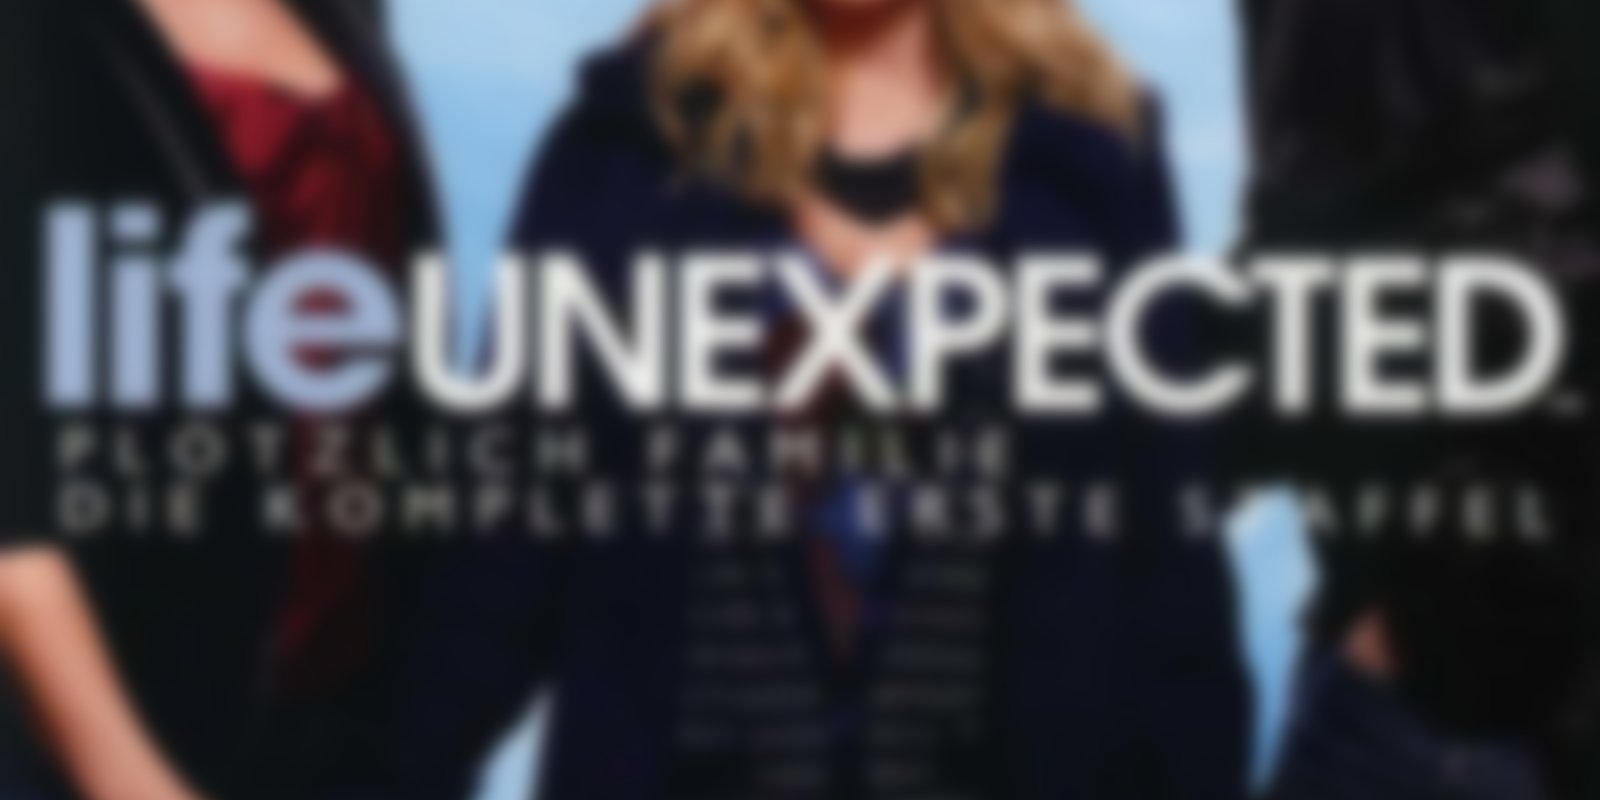 Life Unexpected - Staffel 1